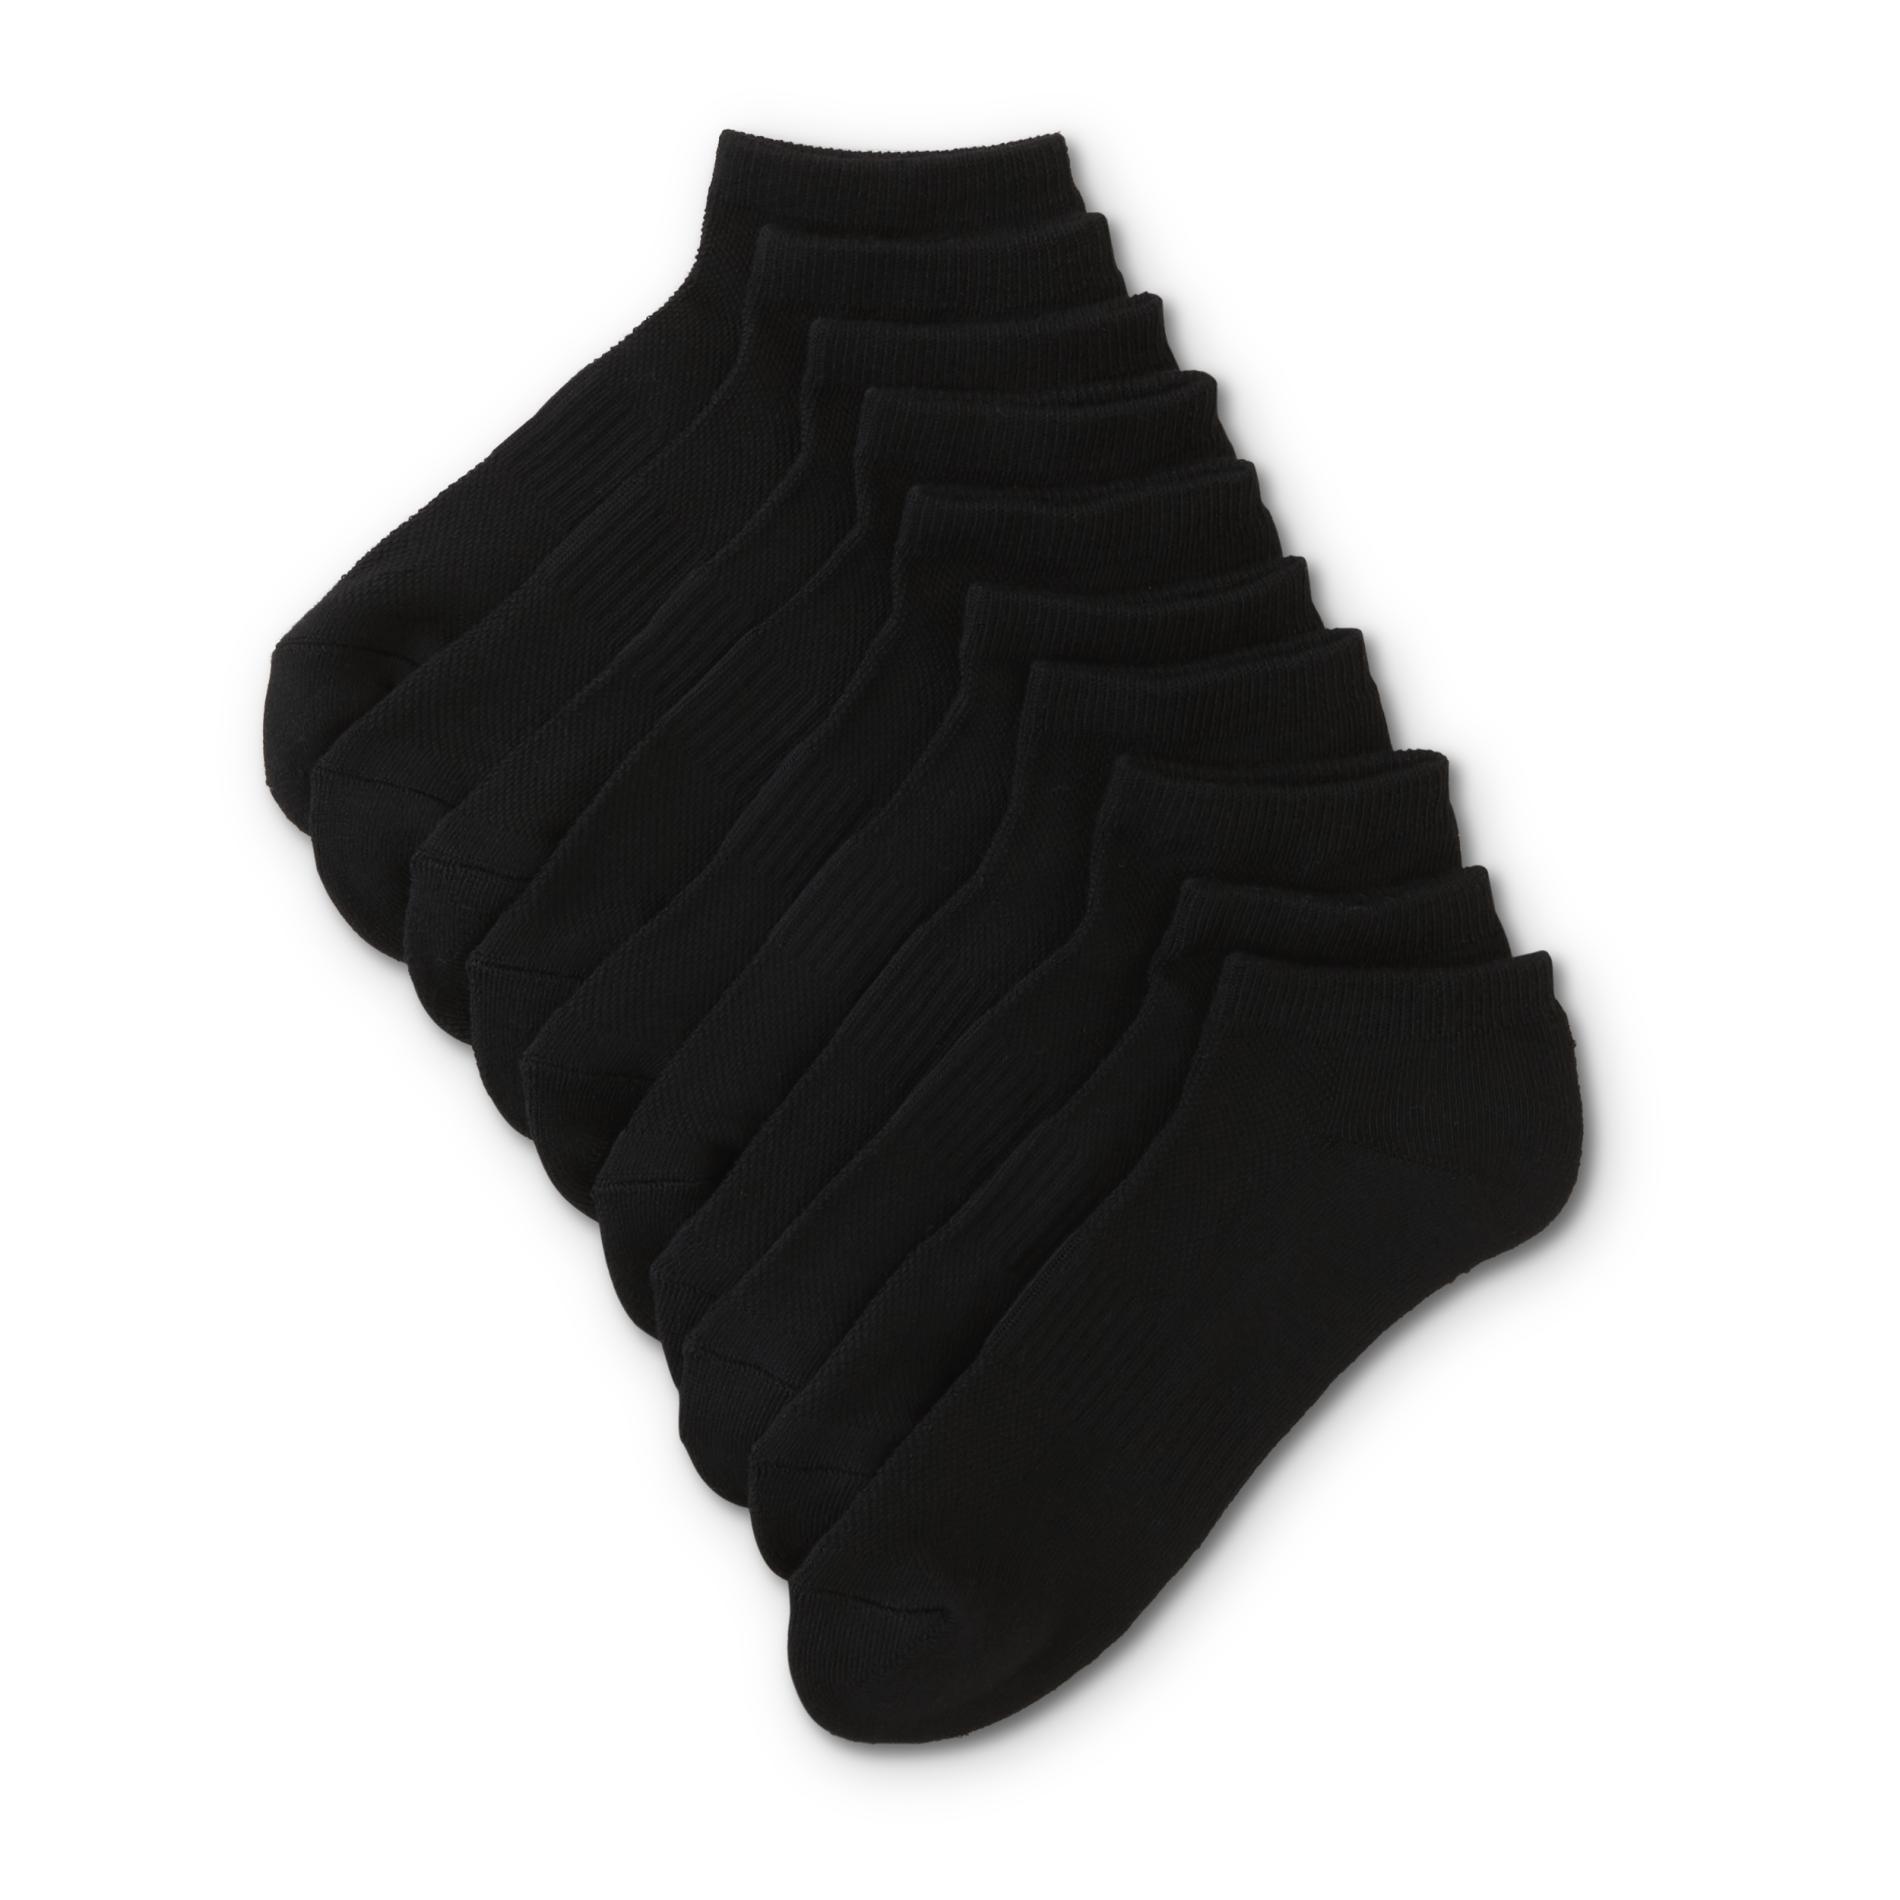 Athletech Women's 10-Pairs AT MAX Low-Cut Athletic Socks